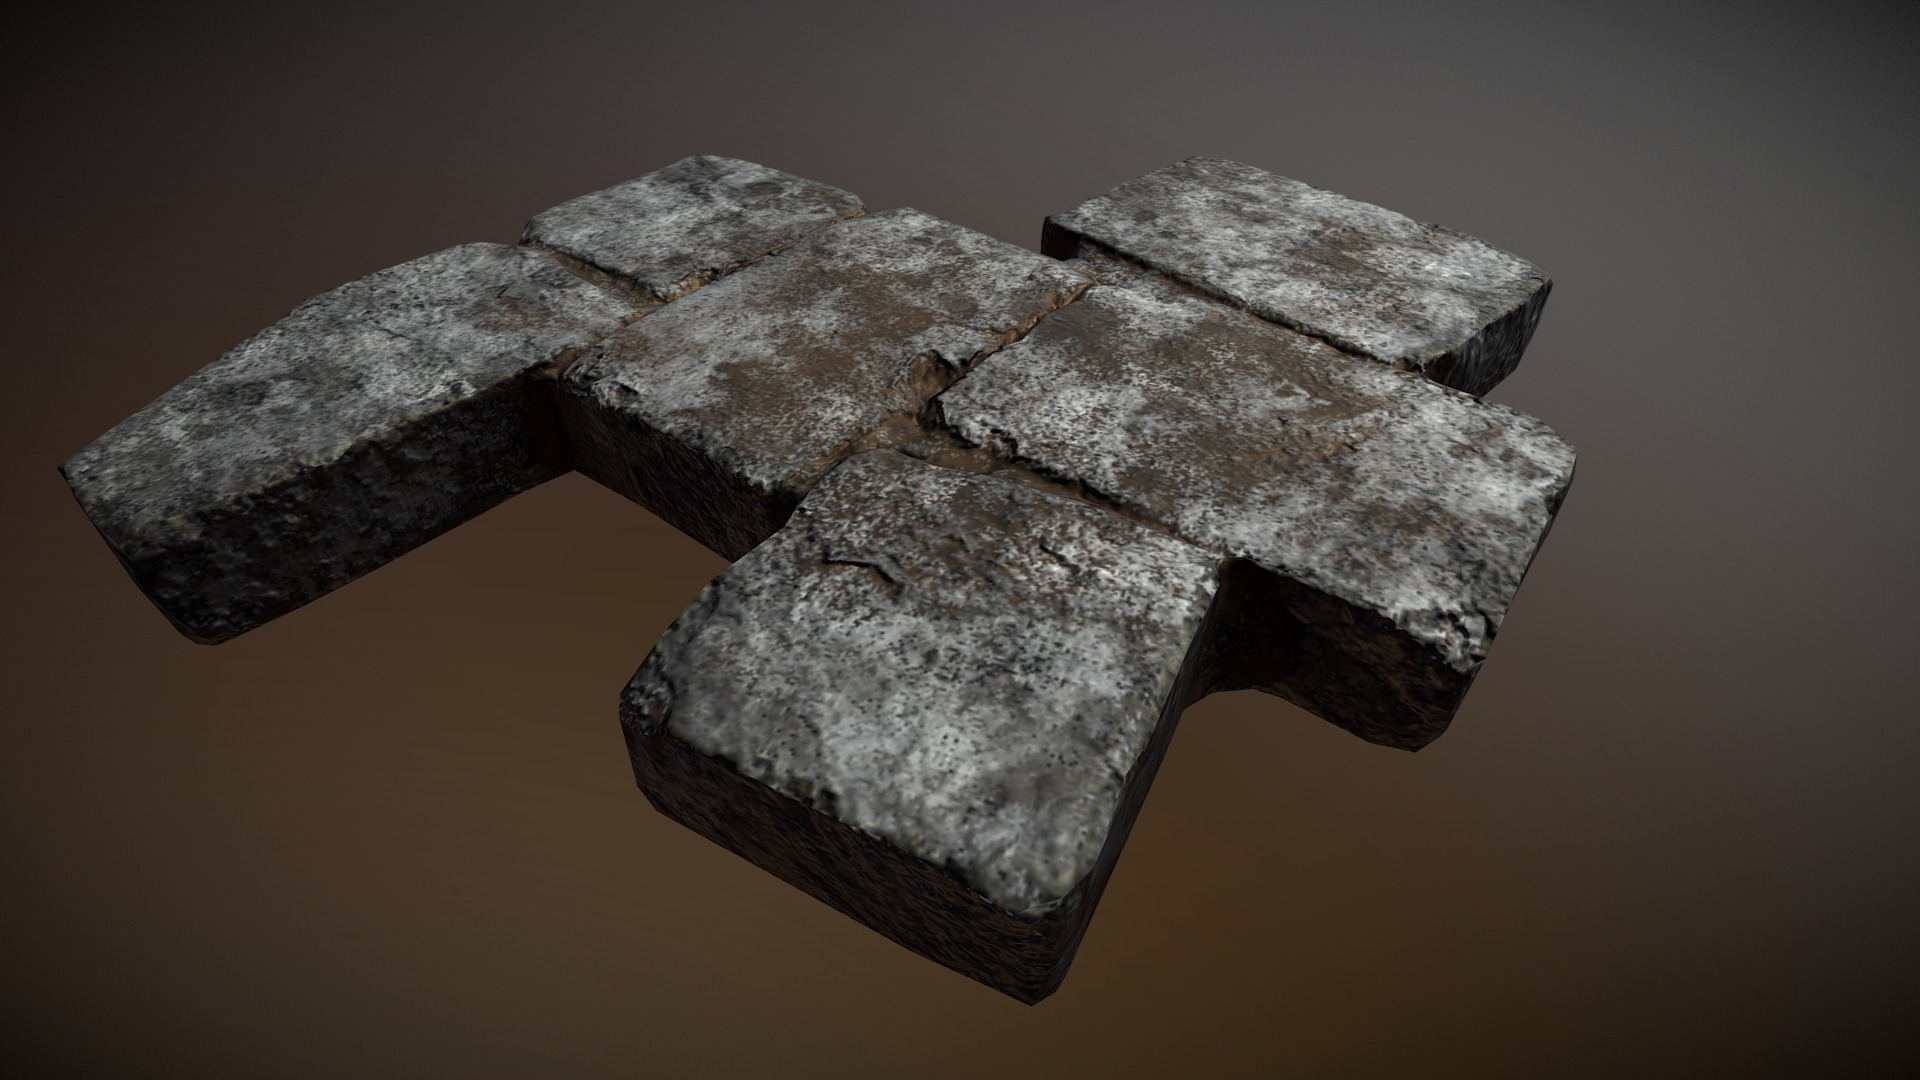 Low Poly Rustic Paver  in Gray Stone texturing. Textured in Substance Painter, 1024 x 1024 - Rustic Pavers Set02 Low Poly | Gray Stone - 3D model by deepfielddev 3d model